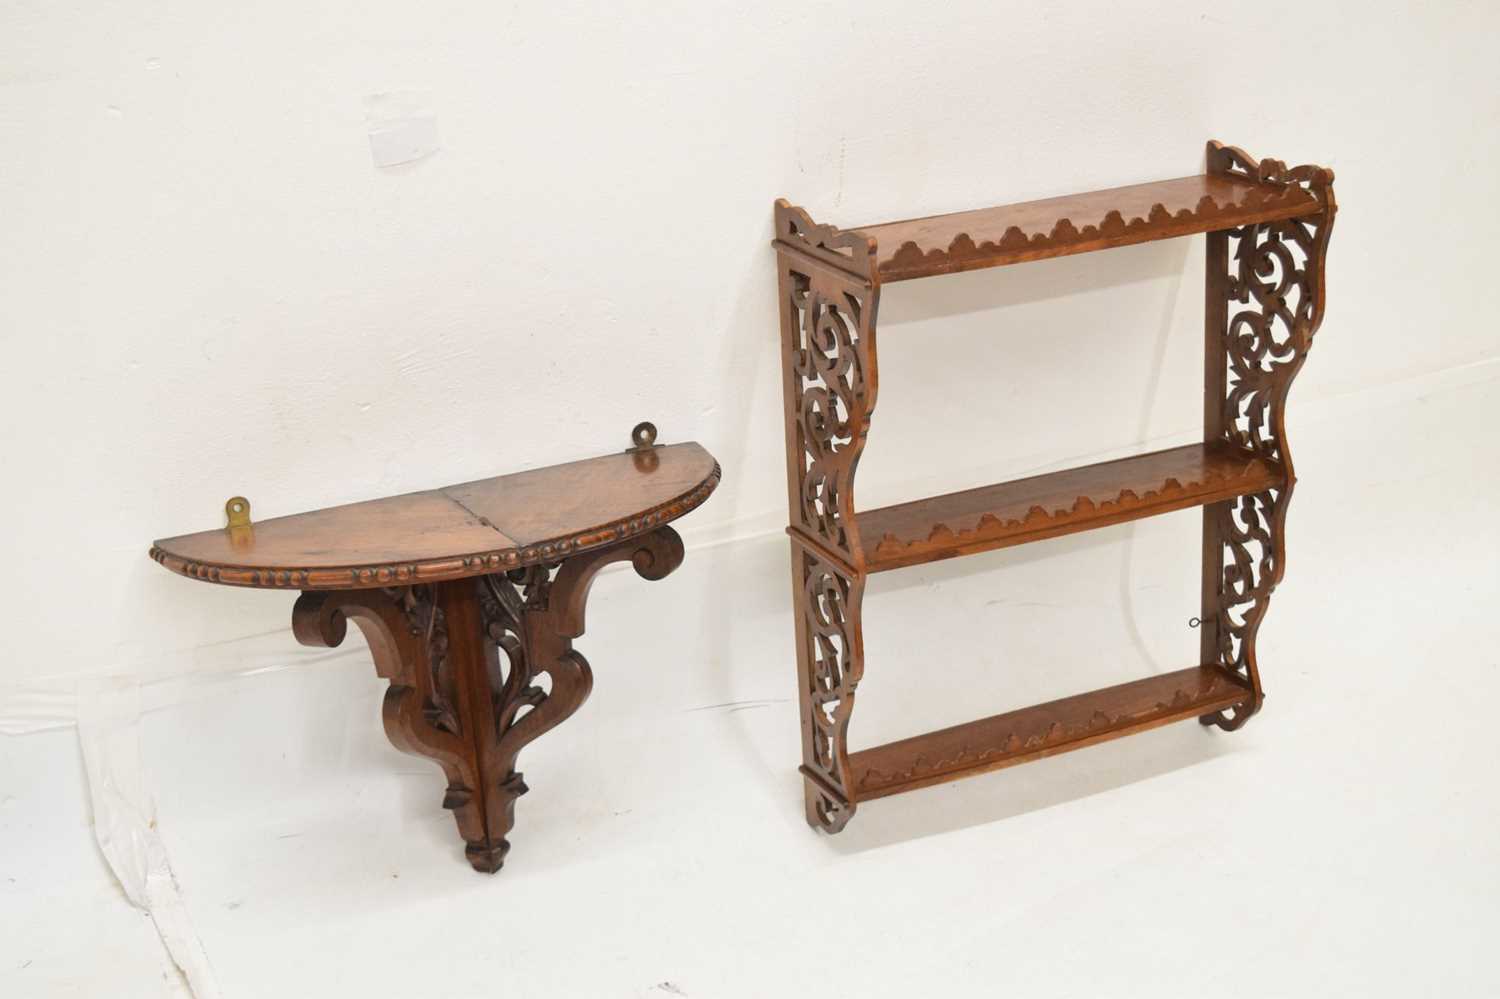 Set of fretwork wall shelves and wall bracket (2) - Image 3 of 10